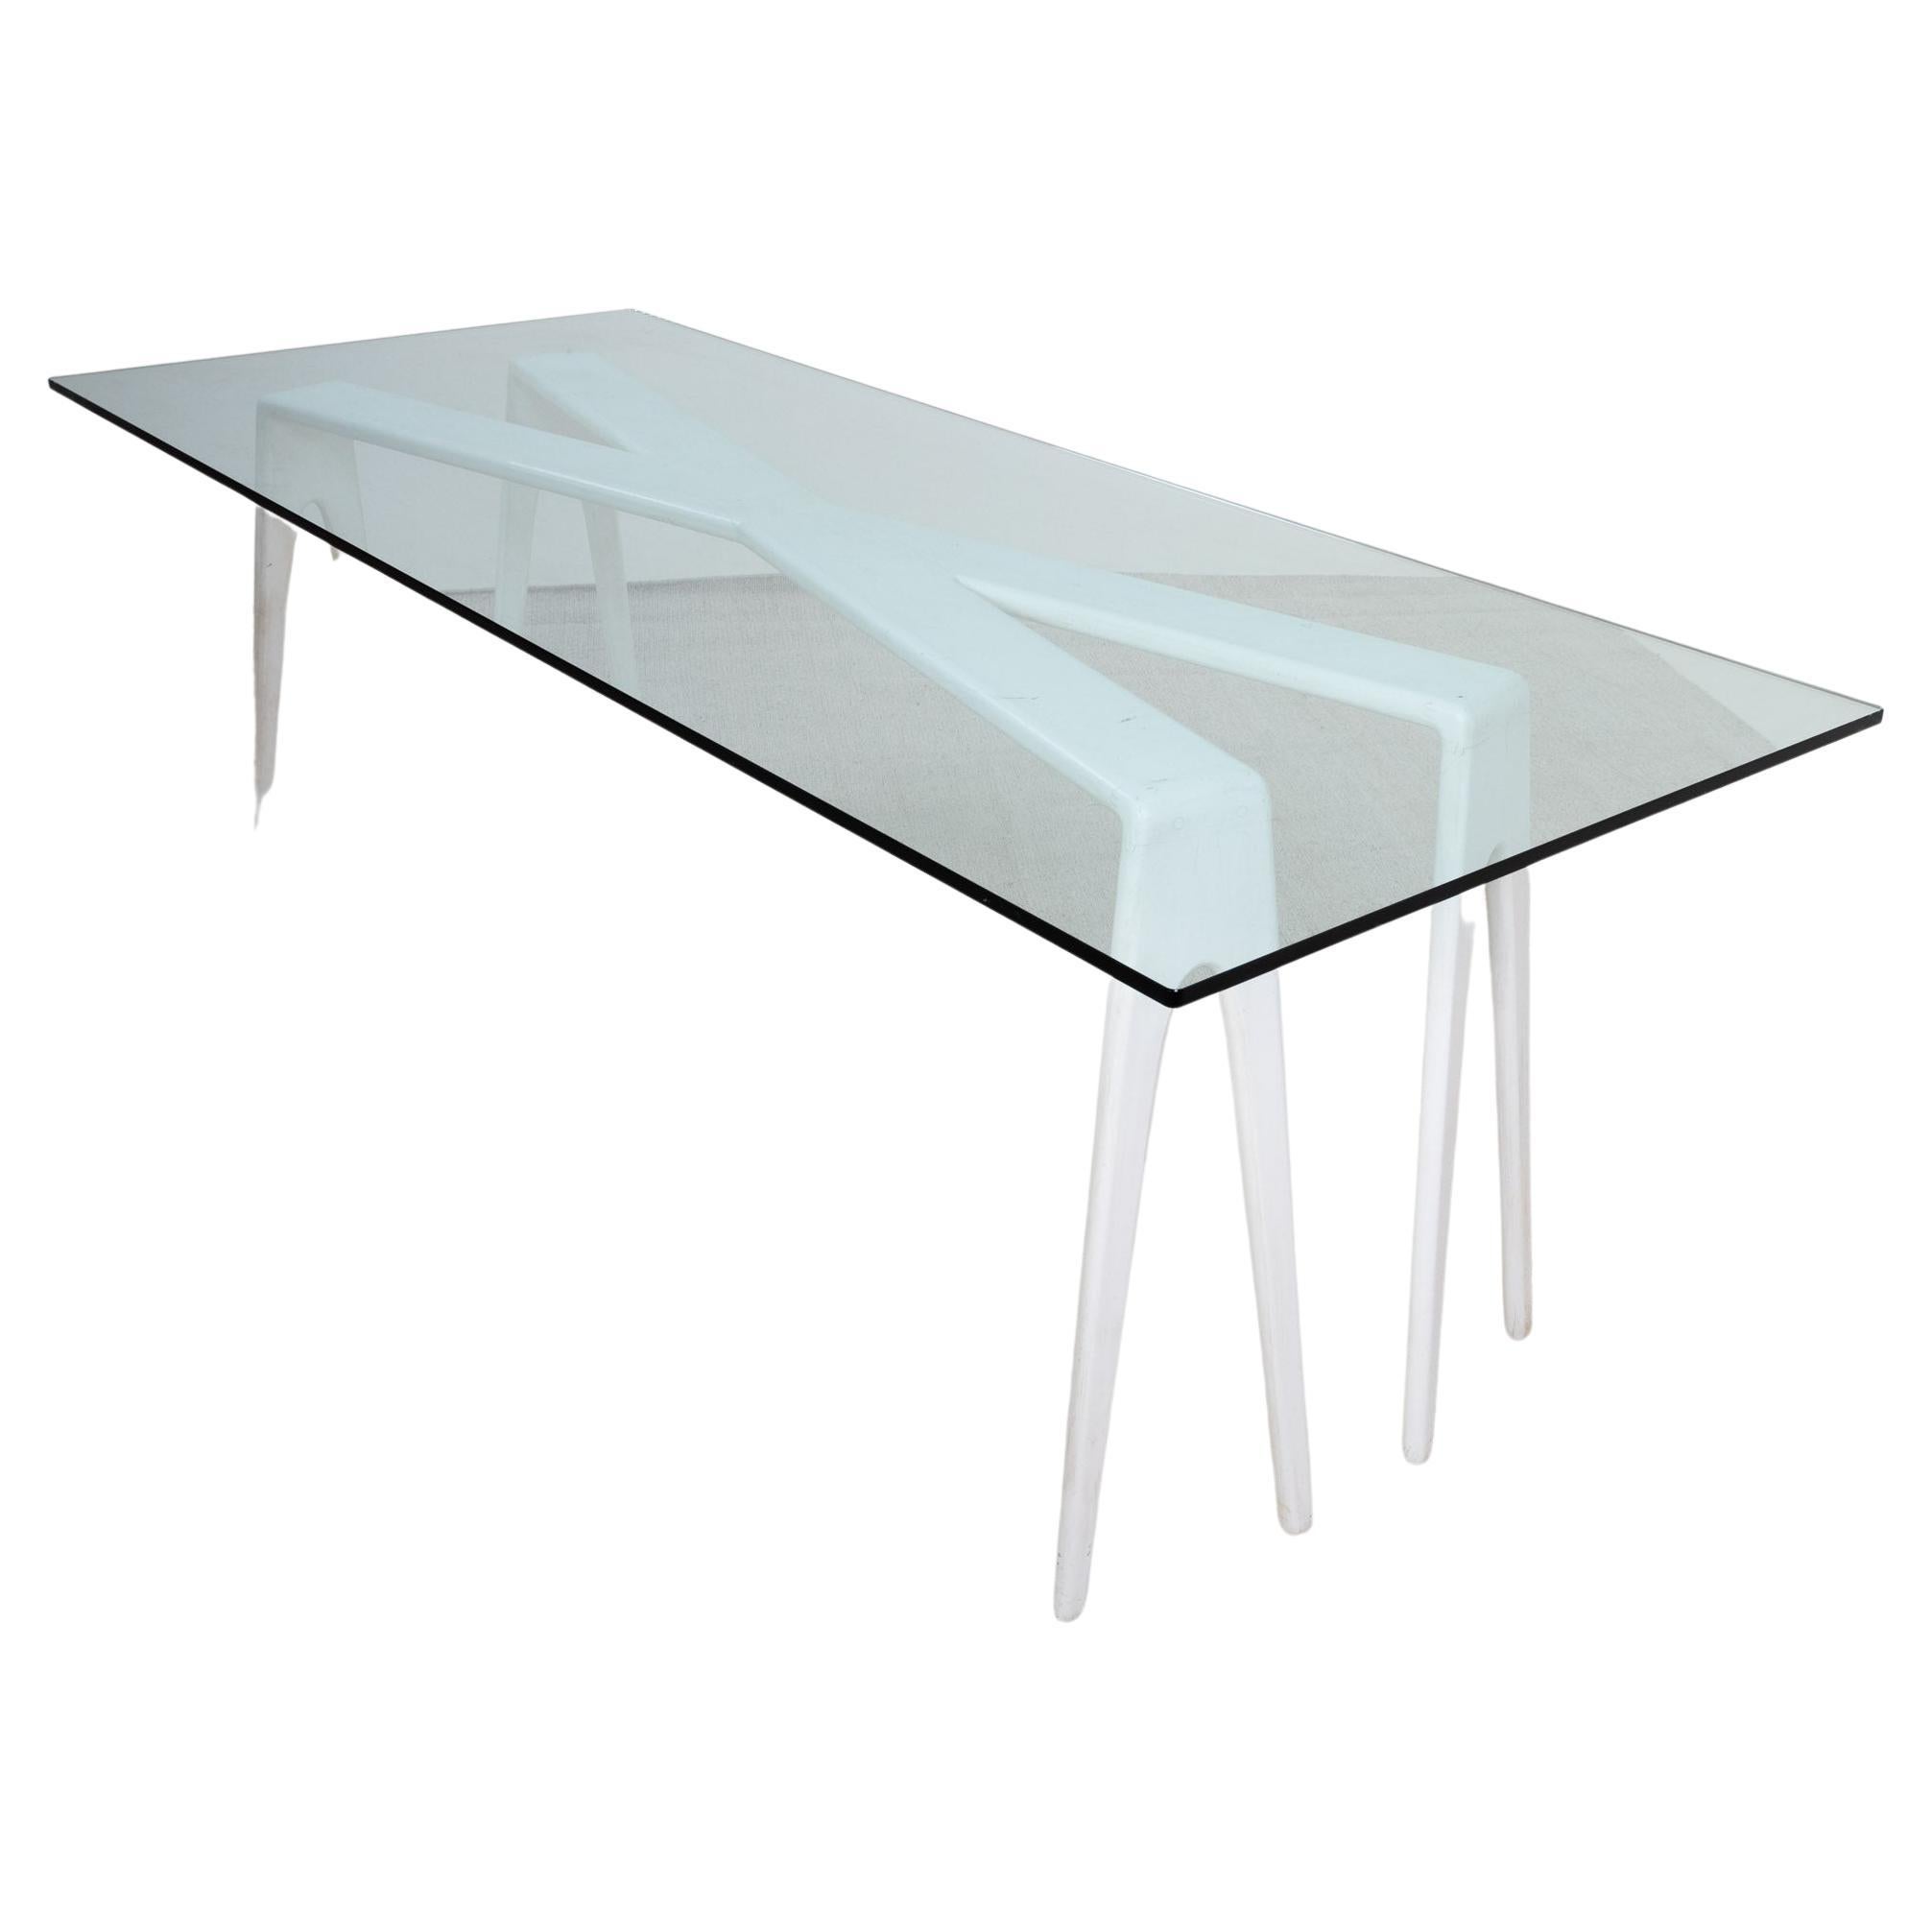 White Dining Table with Glass Top, Le Opere E i Giorni, Italy 20th Century